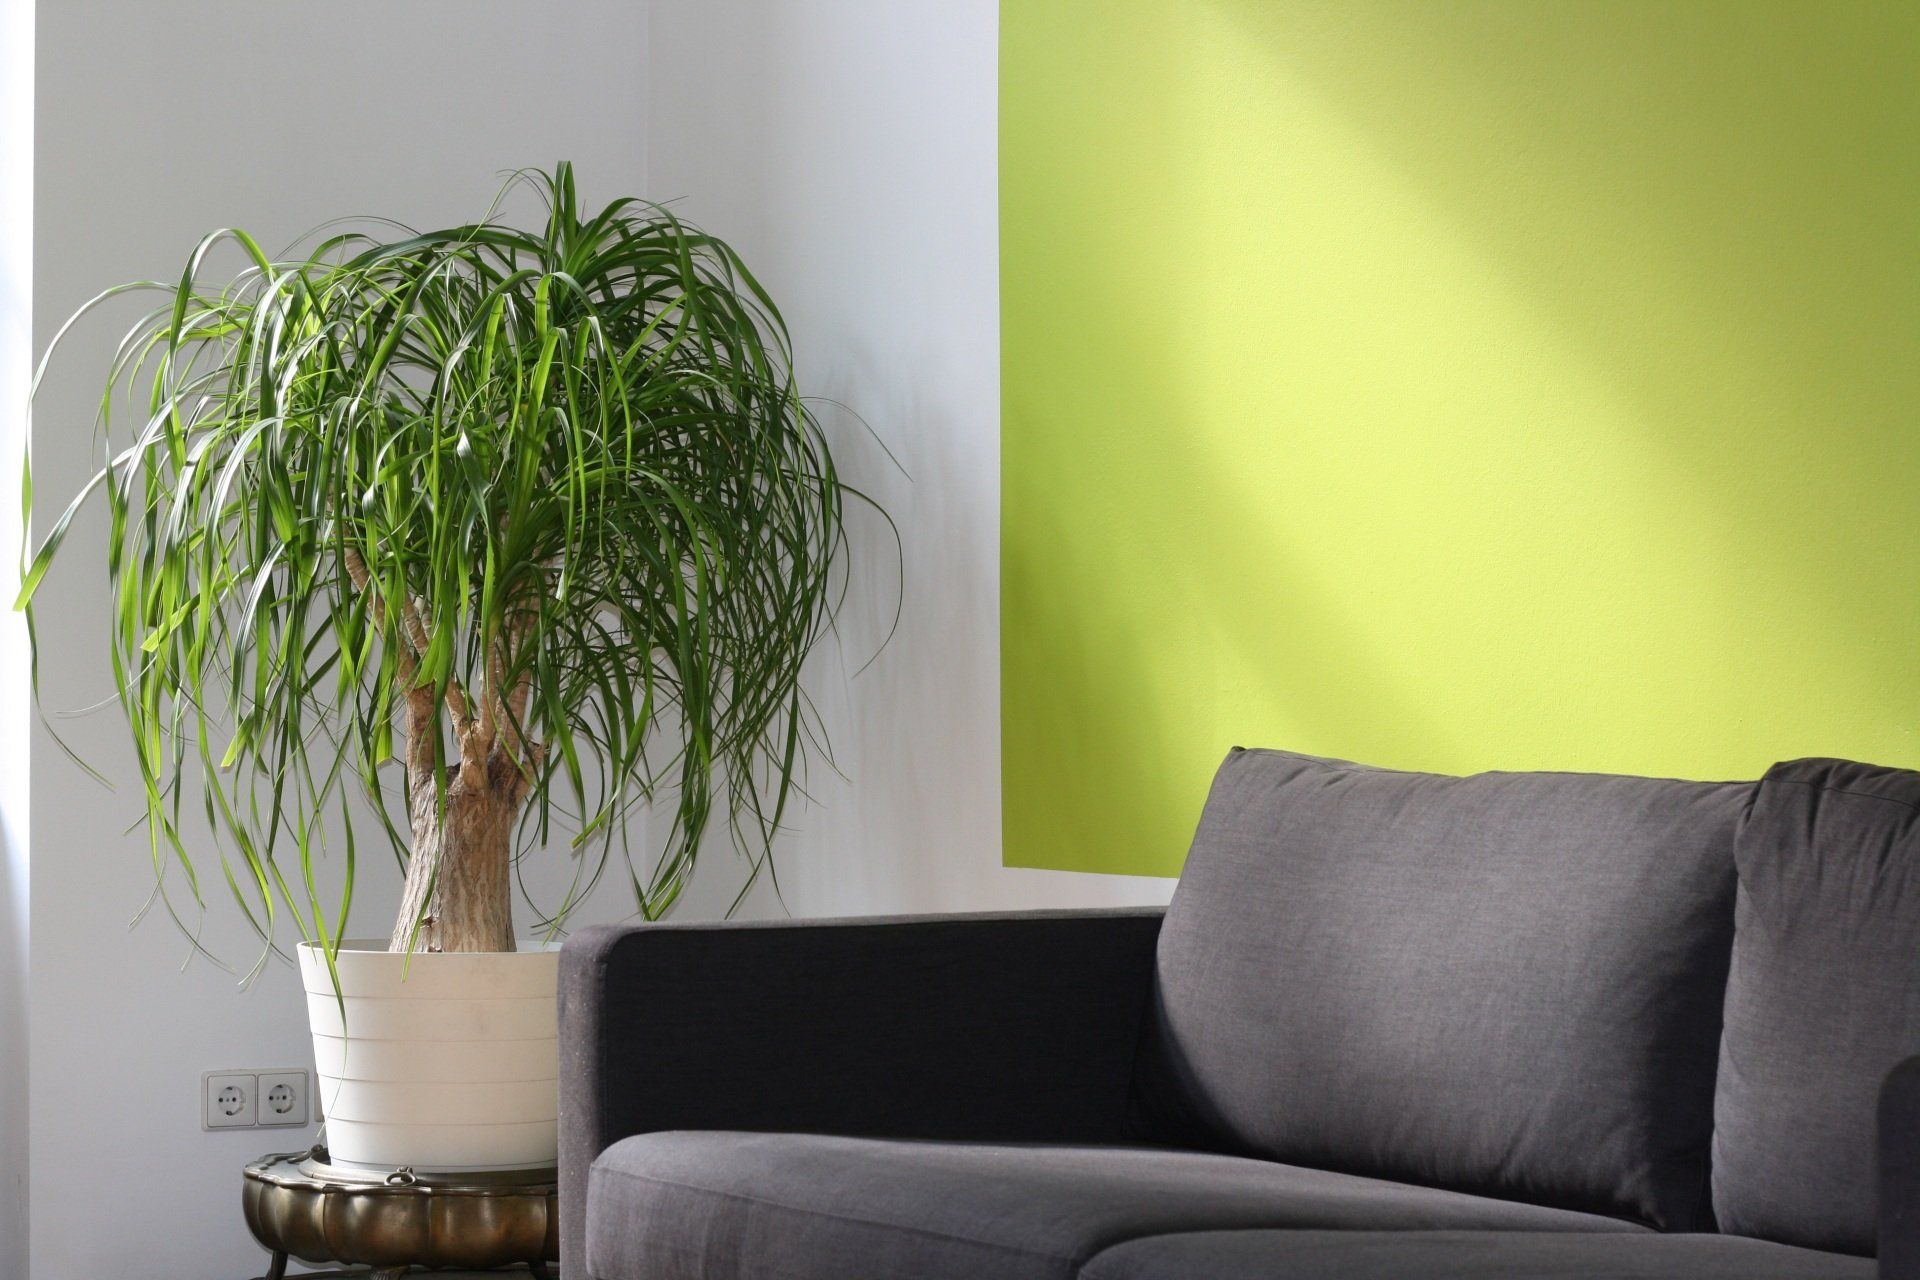 A cozy living room with lime green accent paint for a pop of freshness